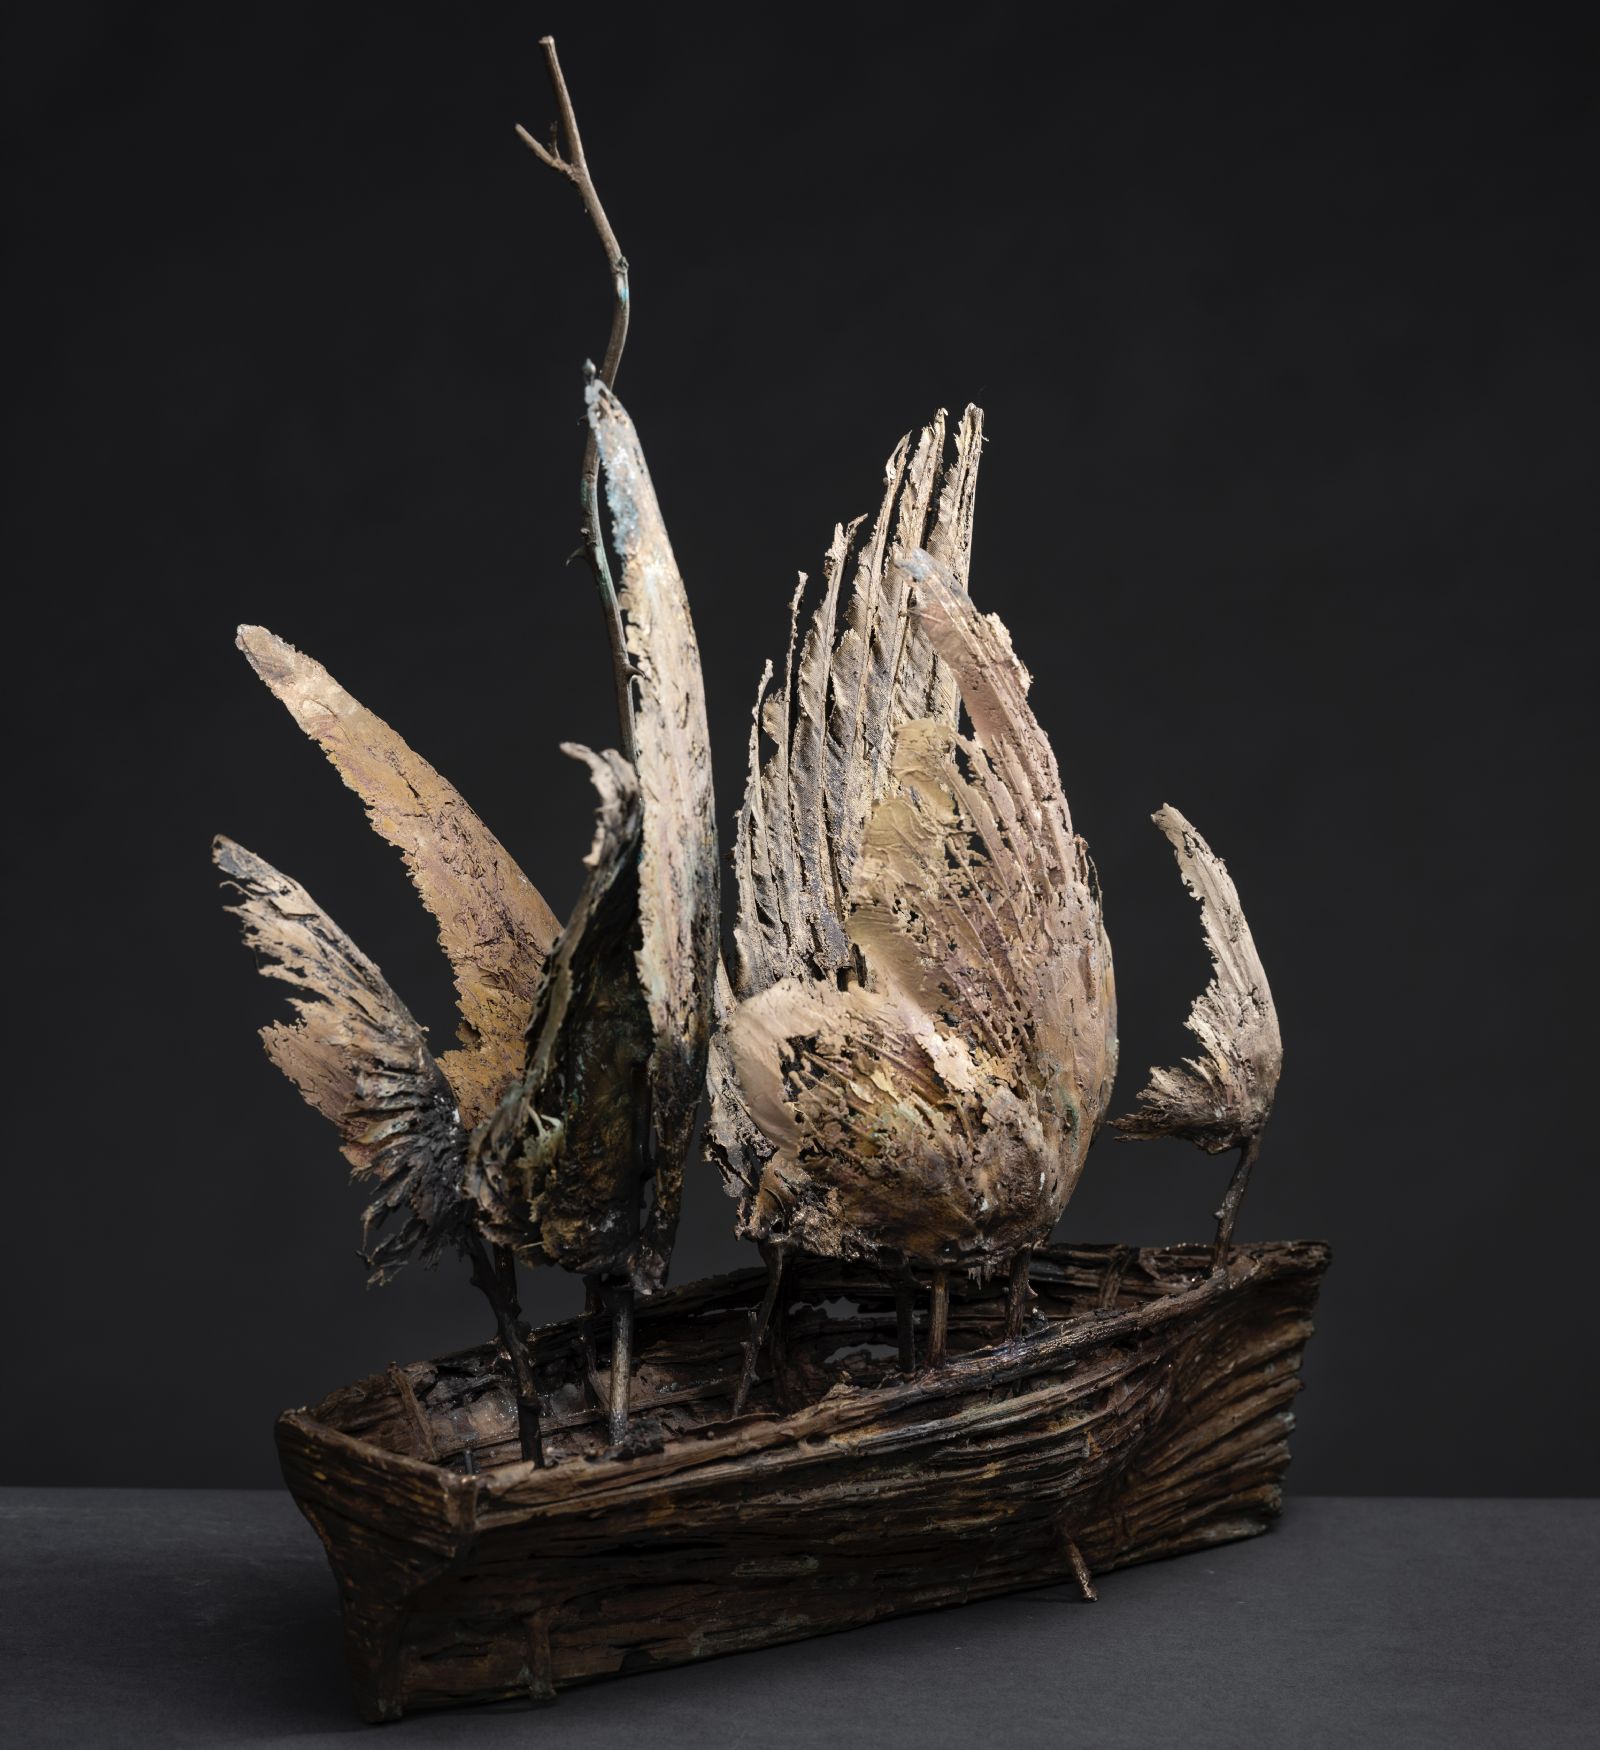 Boat with Wings by Robyn Neild